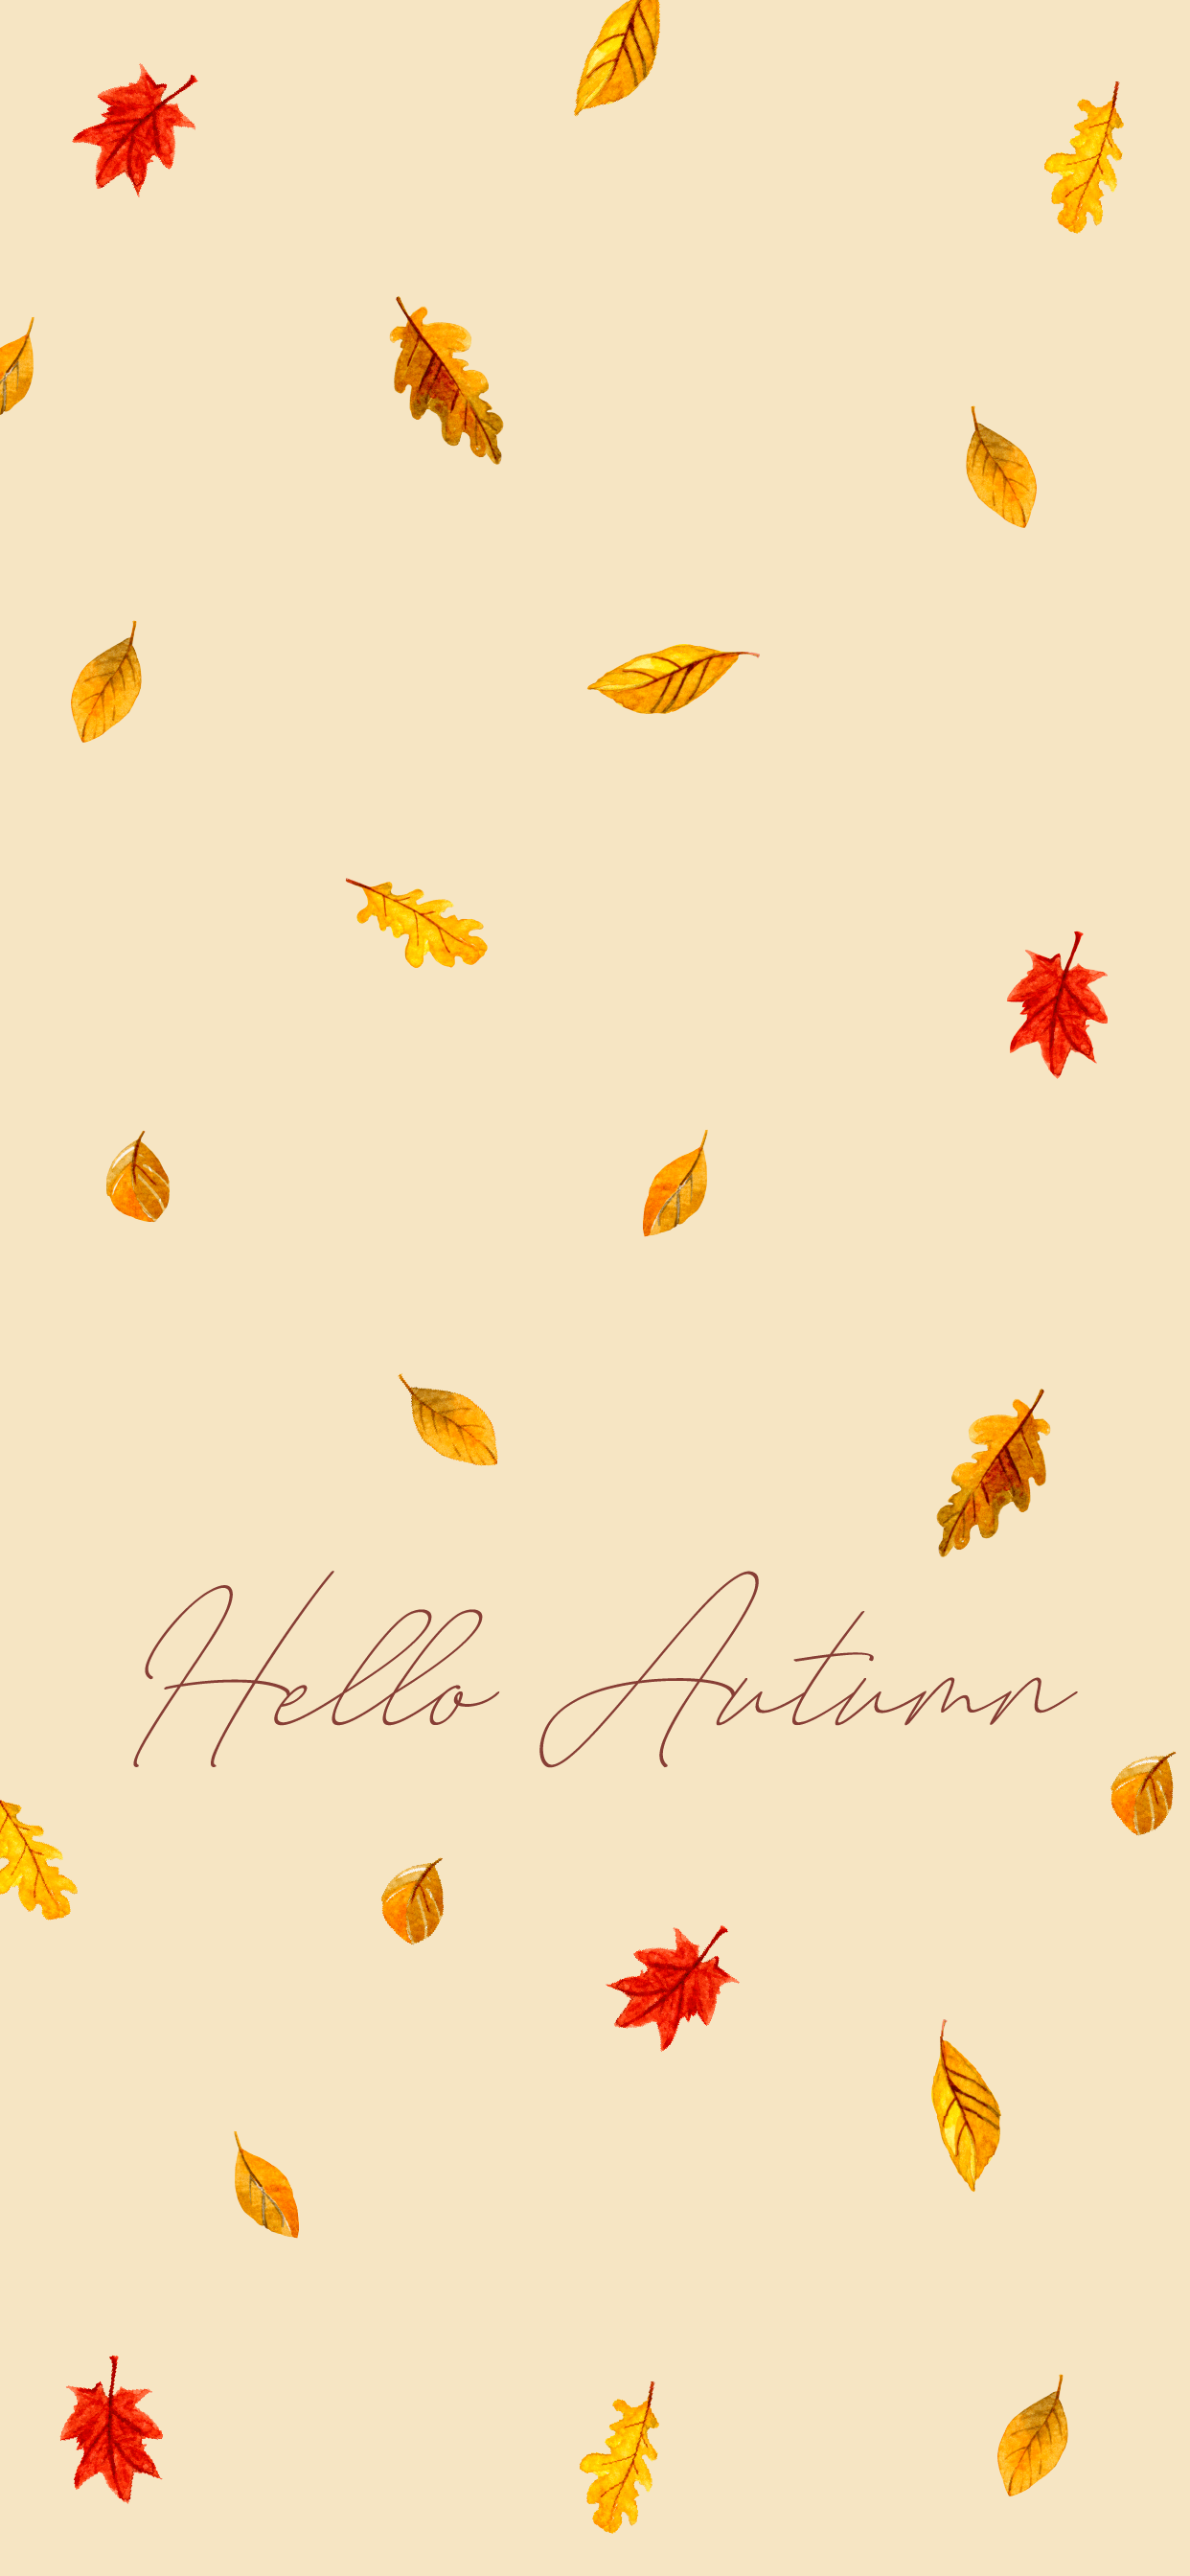 Hello autumn wallpaper with falling leaves and a handwritten font - Fall iPhone